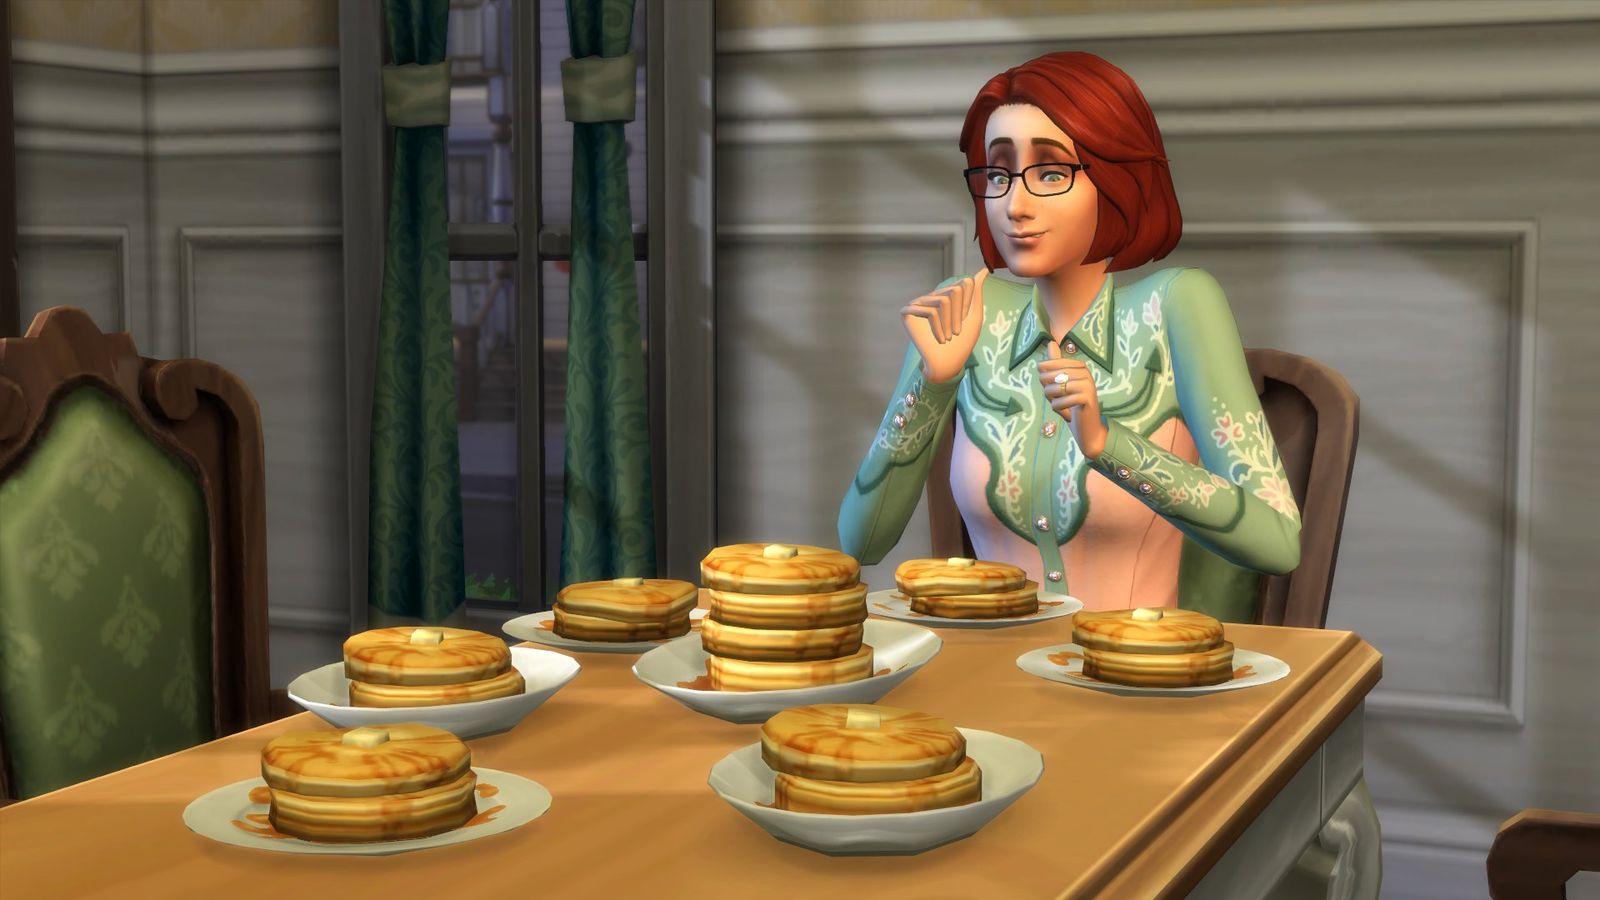 A young woman standing near a table filled with delicious pastries, while a woman behind her assists with the Sims 4 Horse Ranch cheats.